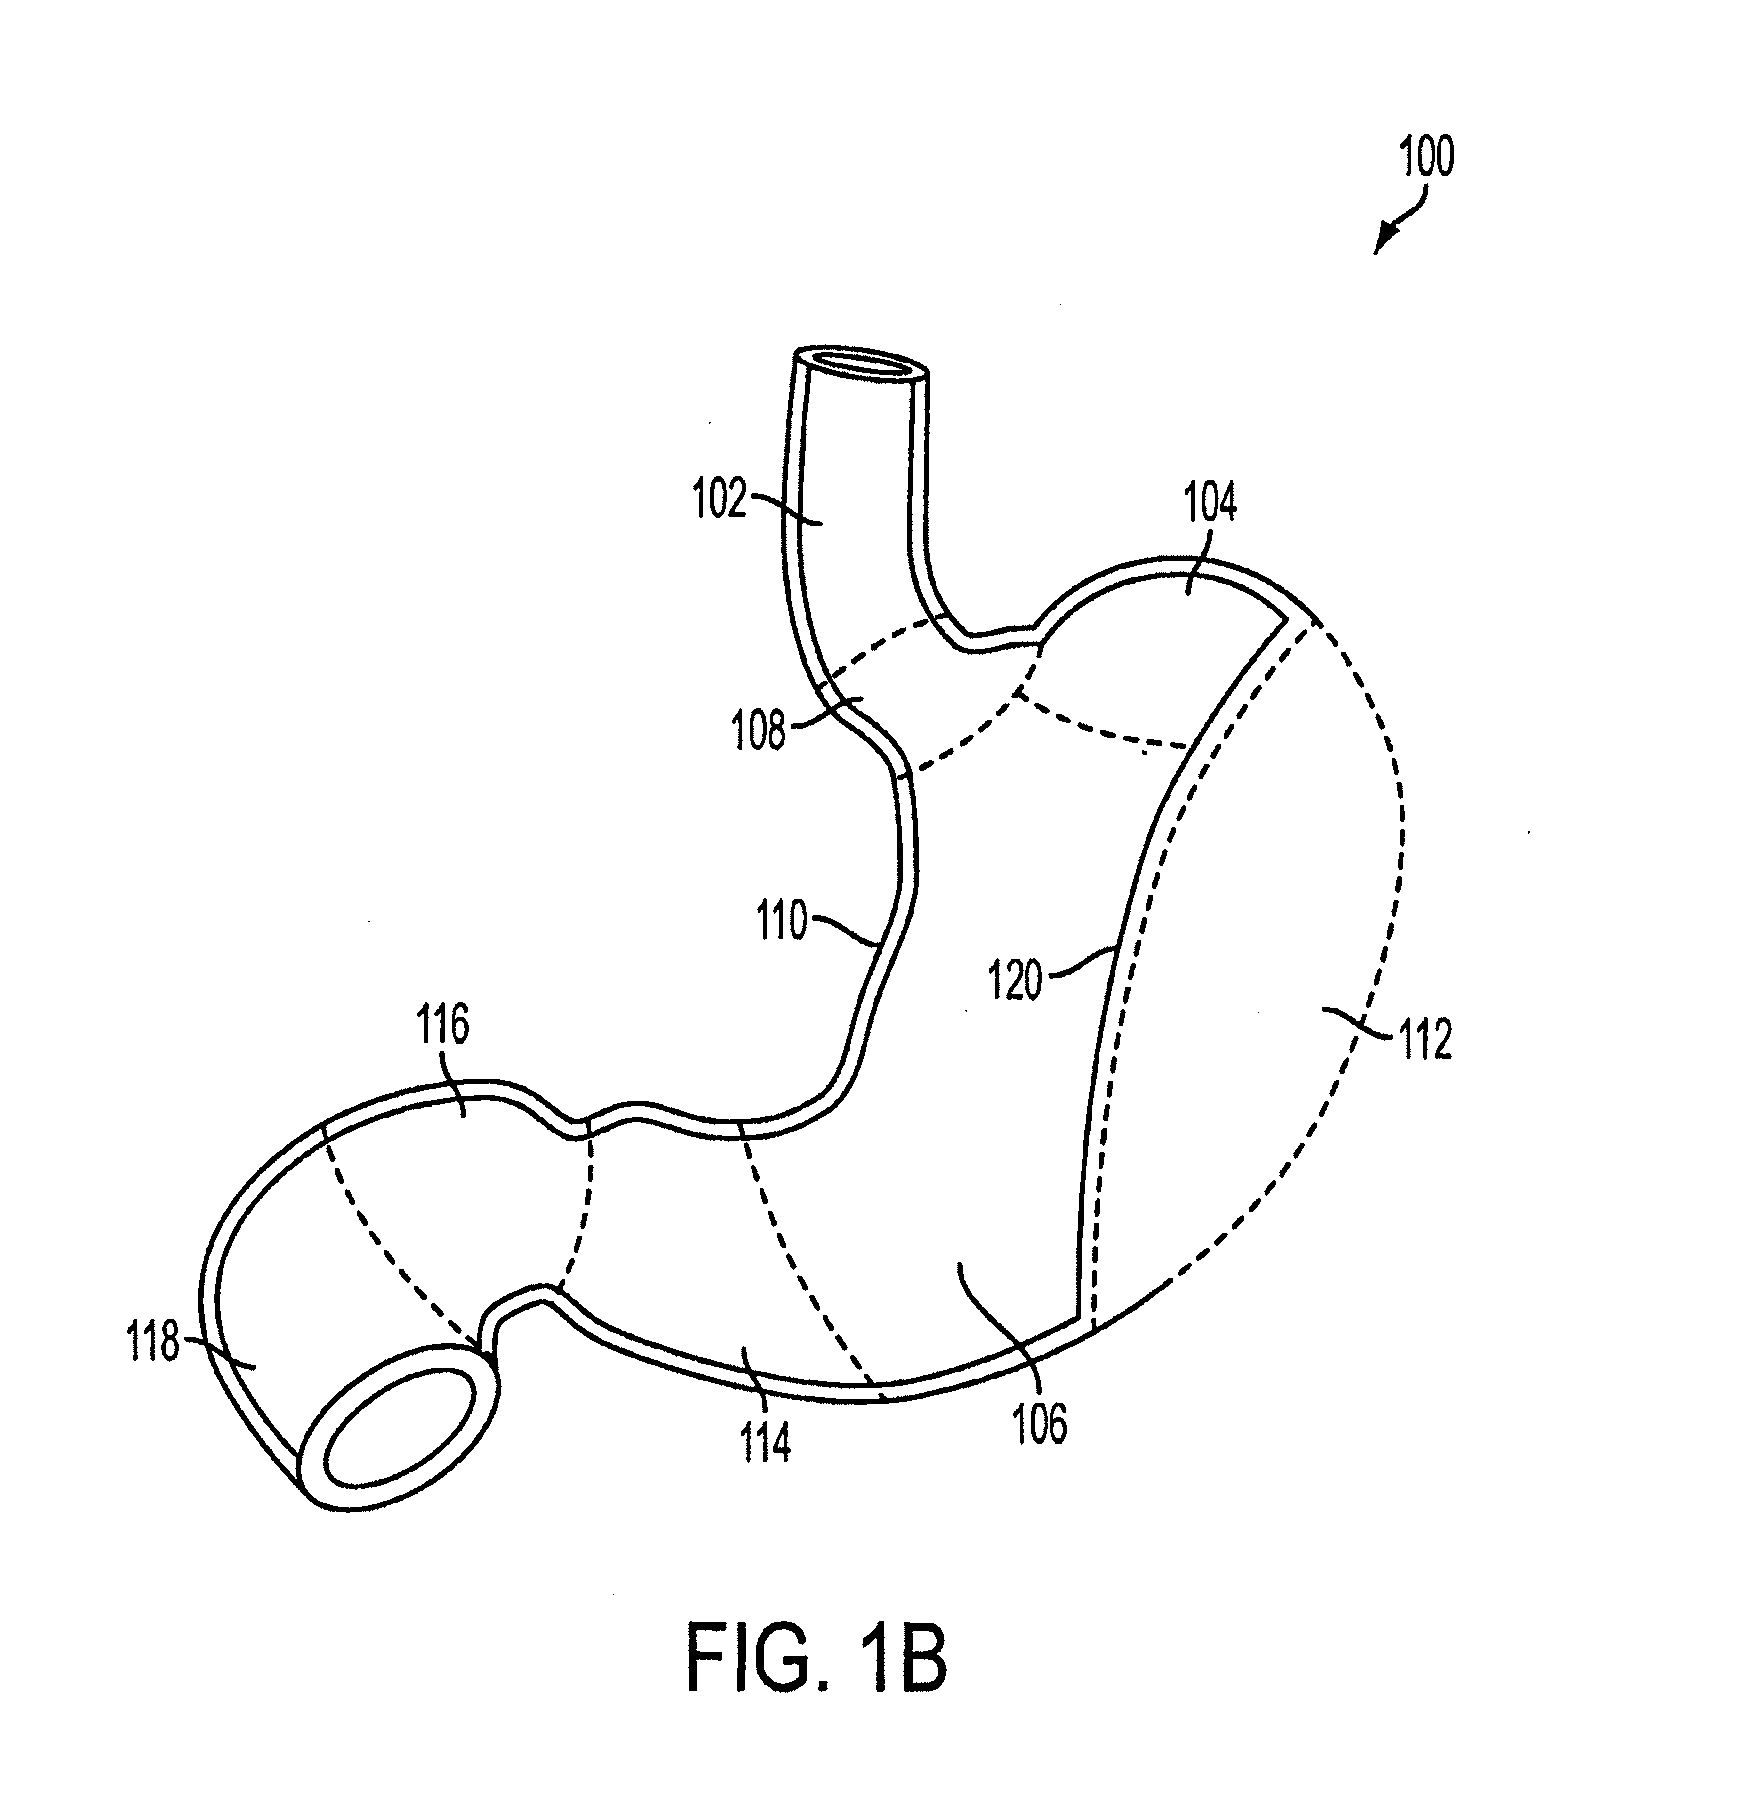 Gastric restriction devices for treating obesity